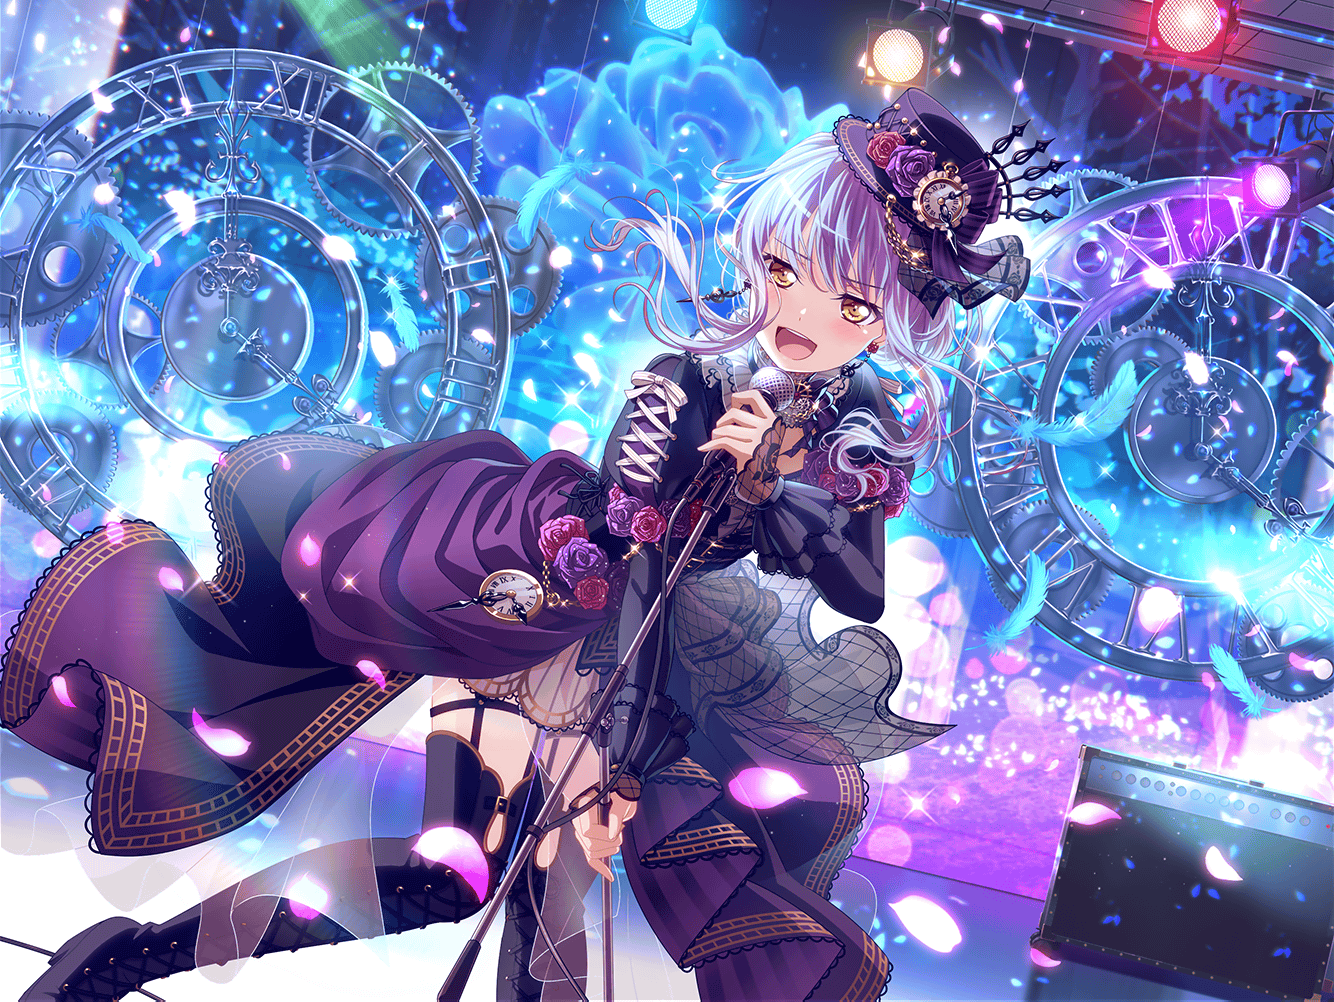 Anime 1334x1002 BanG Dream! minato yukina anime anime girls open mouth looking at viewer long hair Roman numerals clocks standing women with hats hat long sleeves petals microphone earring black thigh highs thigh-highs pocket watch time feathers dress singing stage light lights sparkles